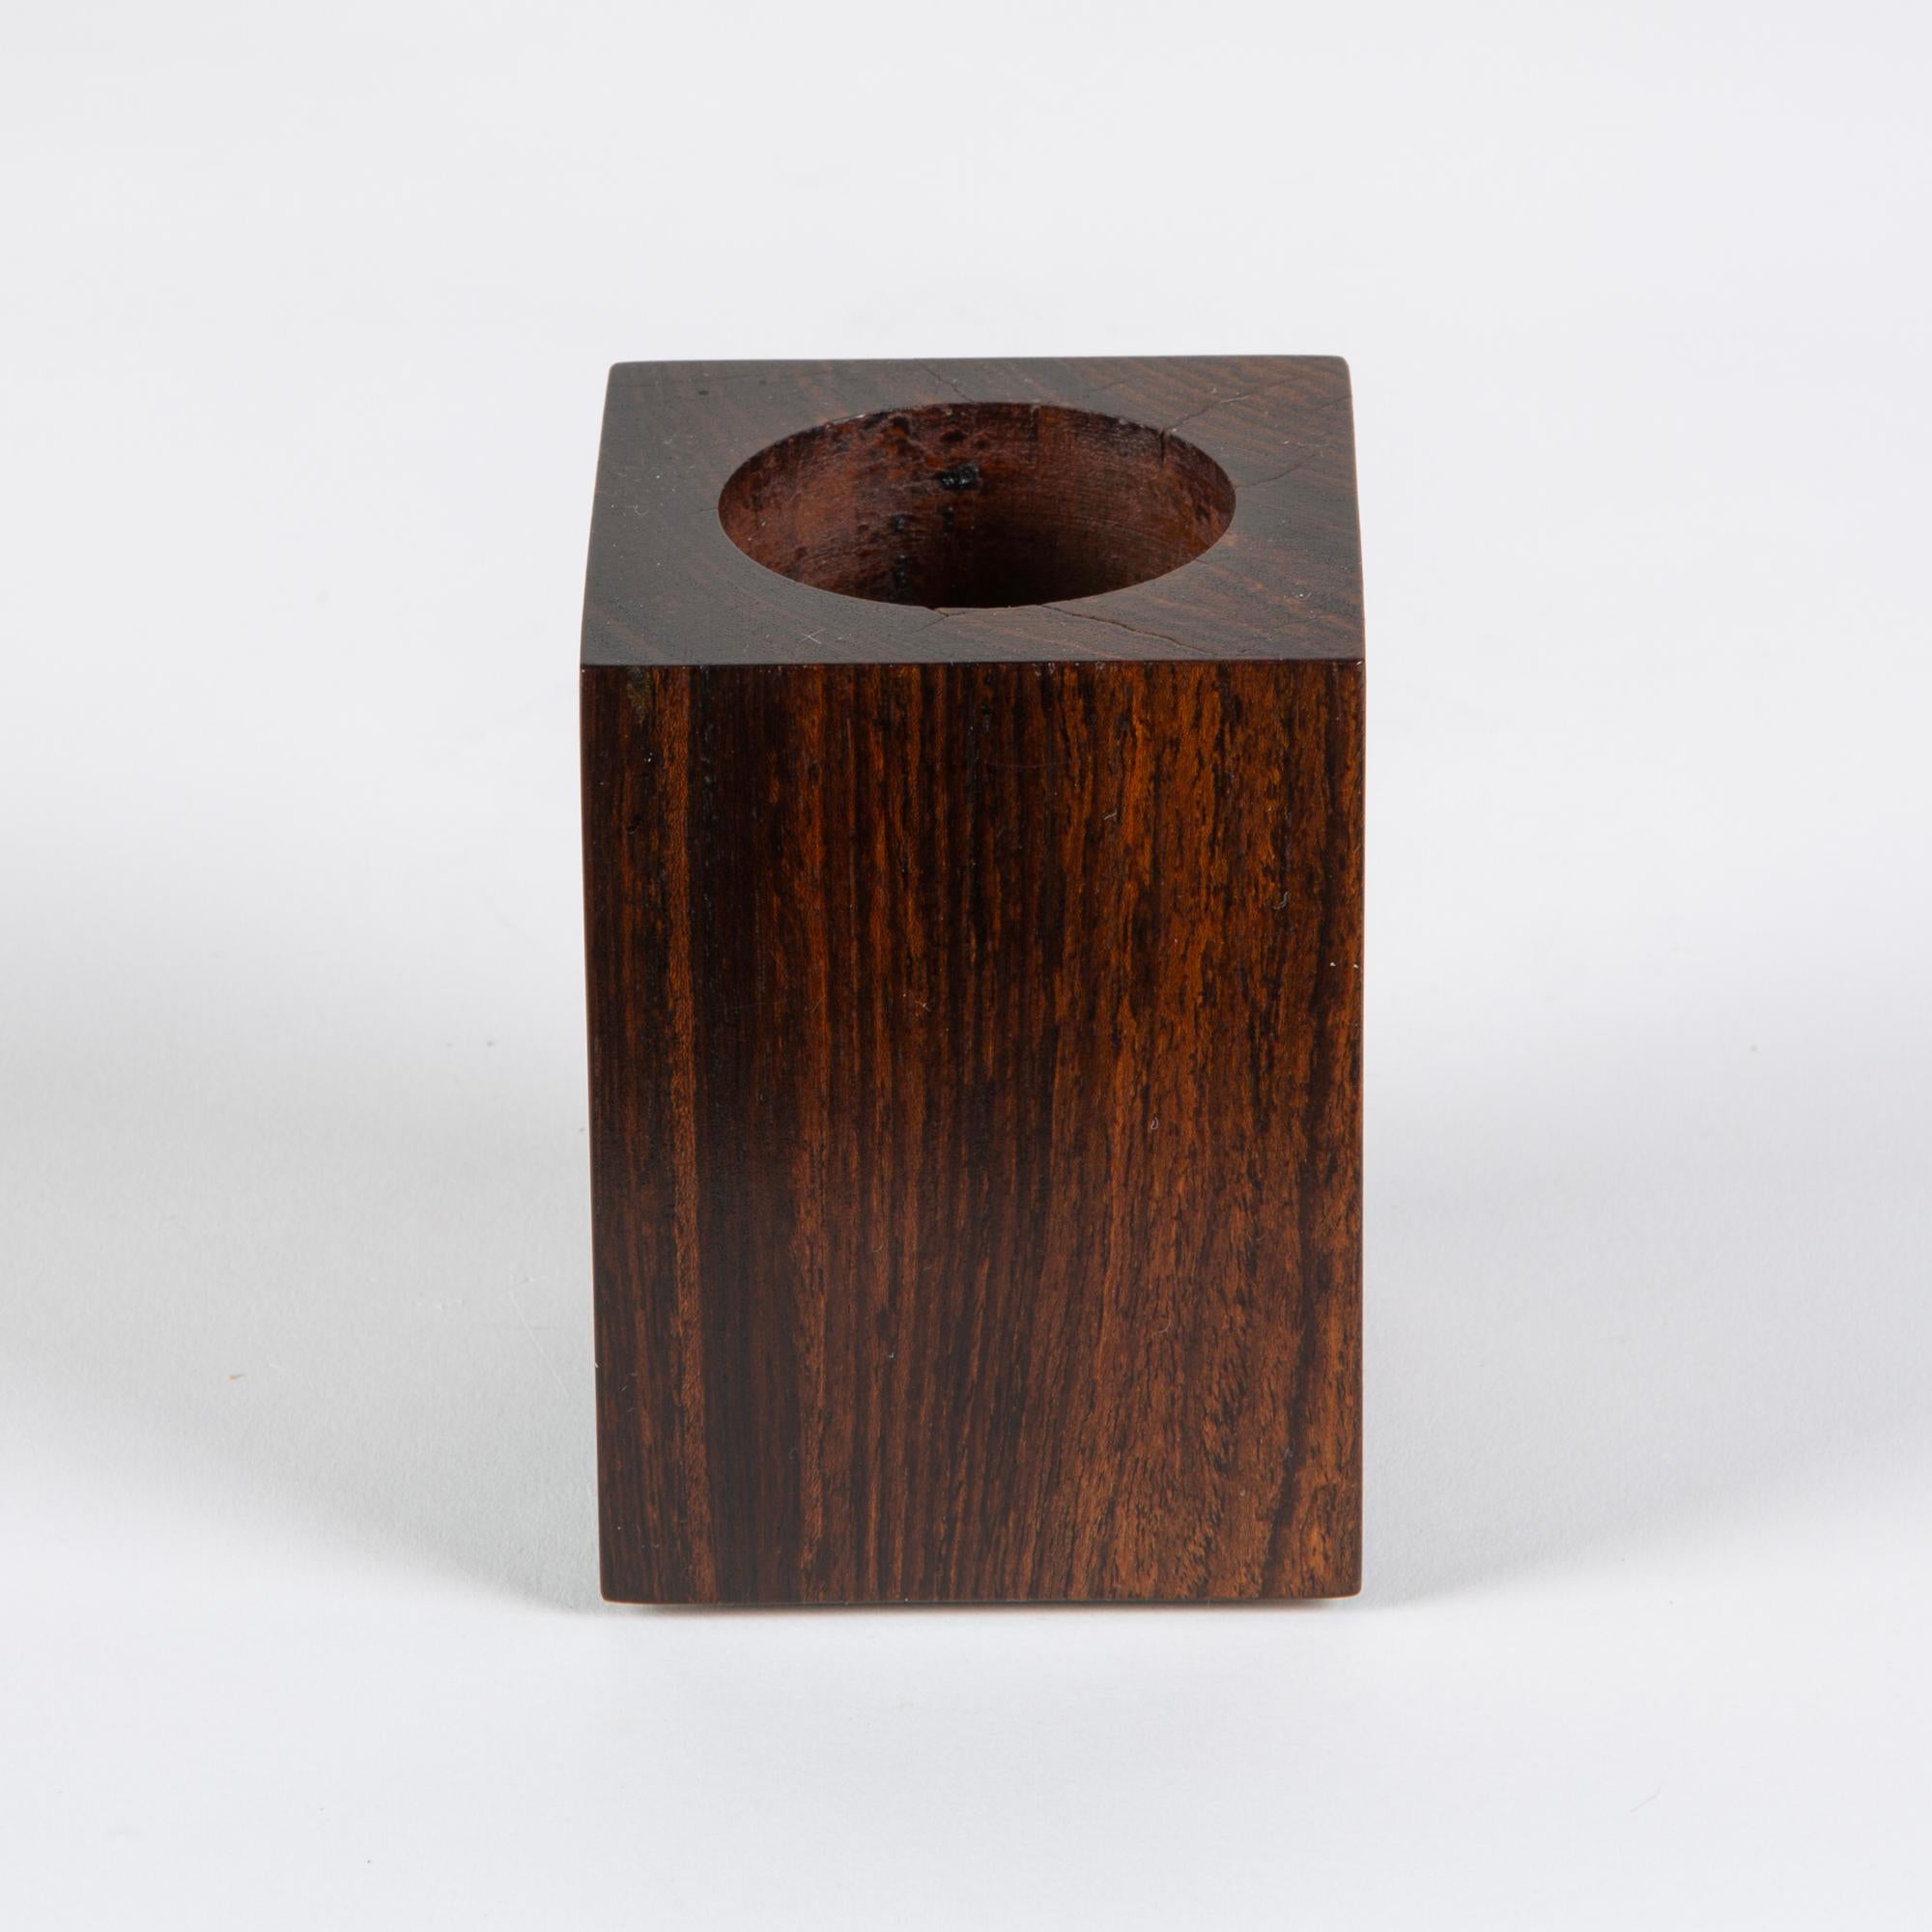 Don Shoemaker block vessel for Señal Rosewood vessel. The hand carved minimalist vessel features a geometric block design with circular carving in the center of the vessel.

Labeled - SENAL S.A. Hecho en Mexico

CITES Notice: Due to stringent